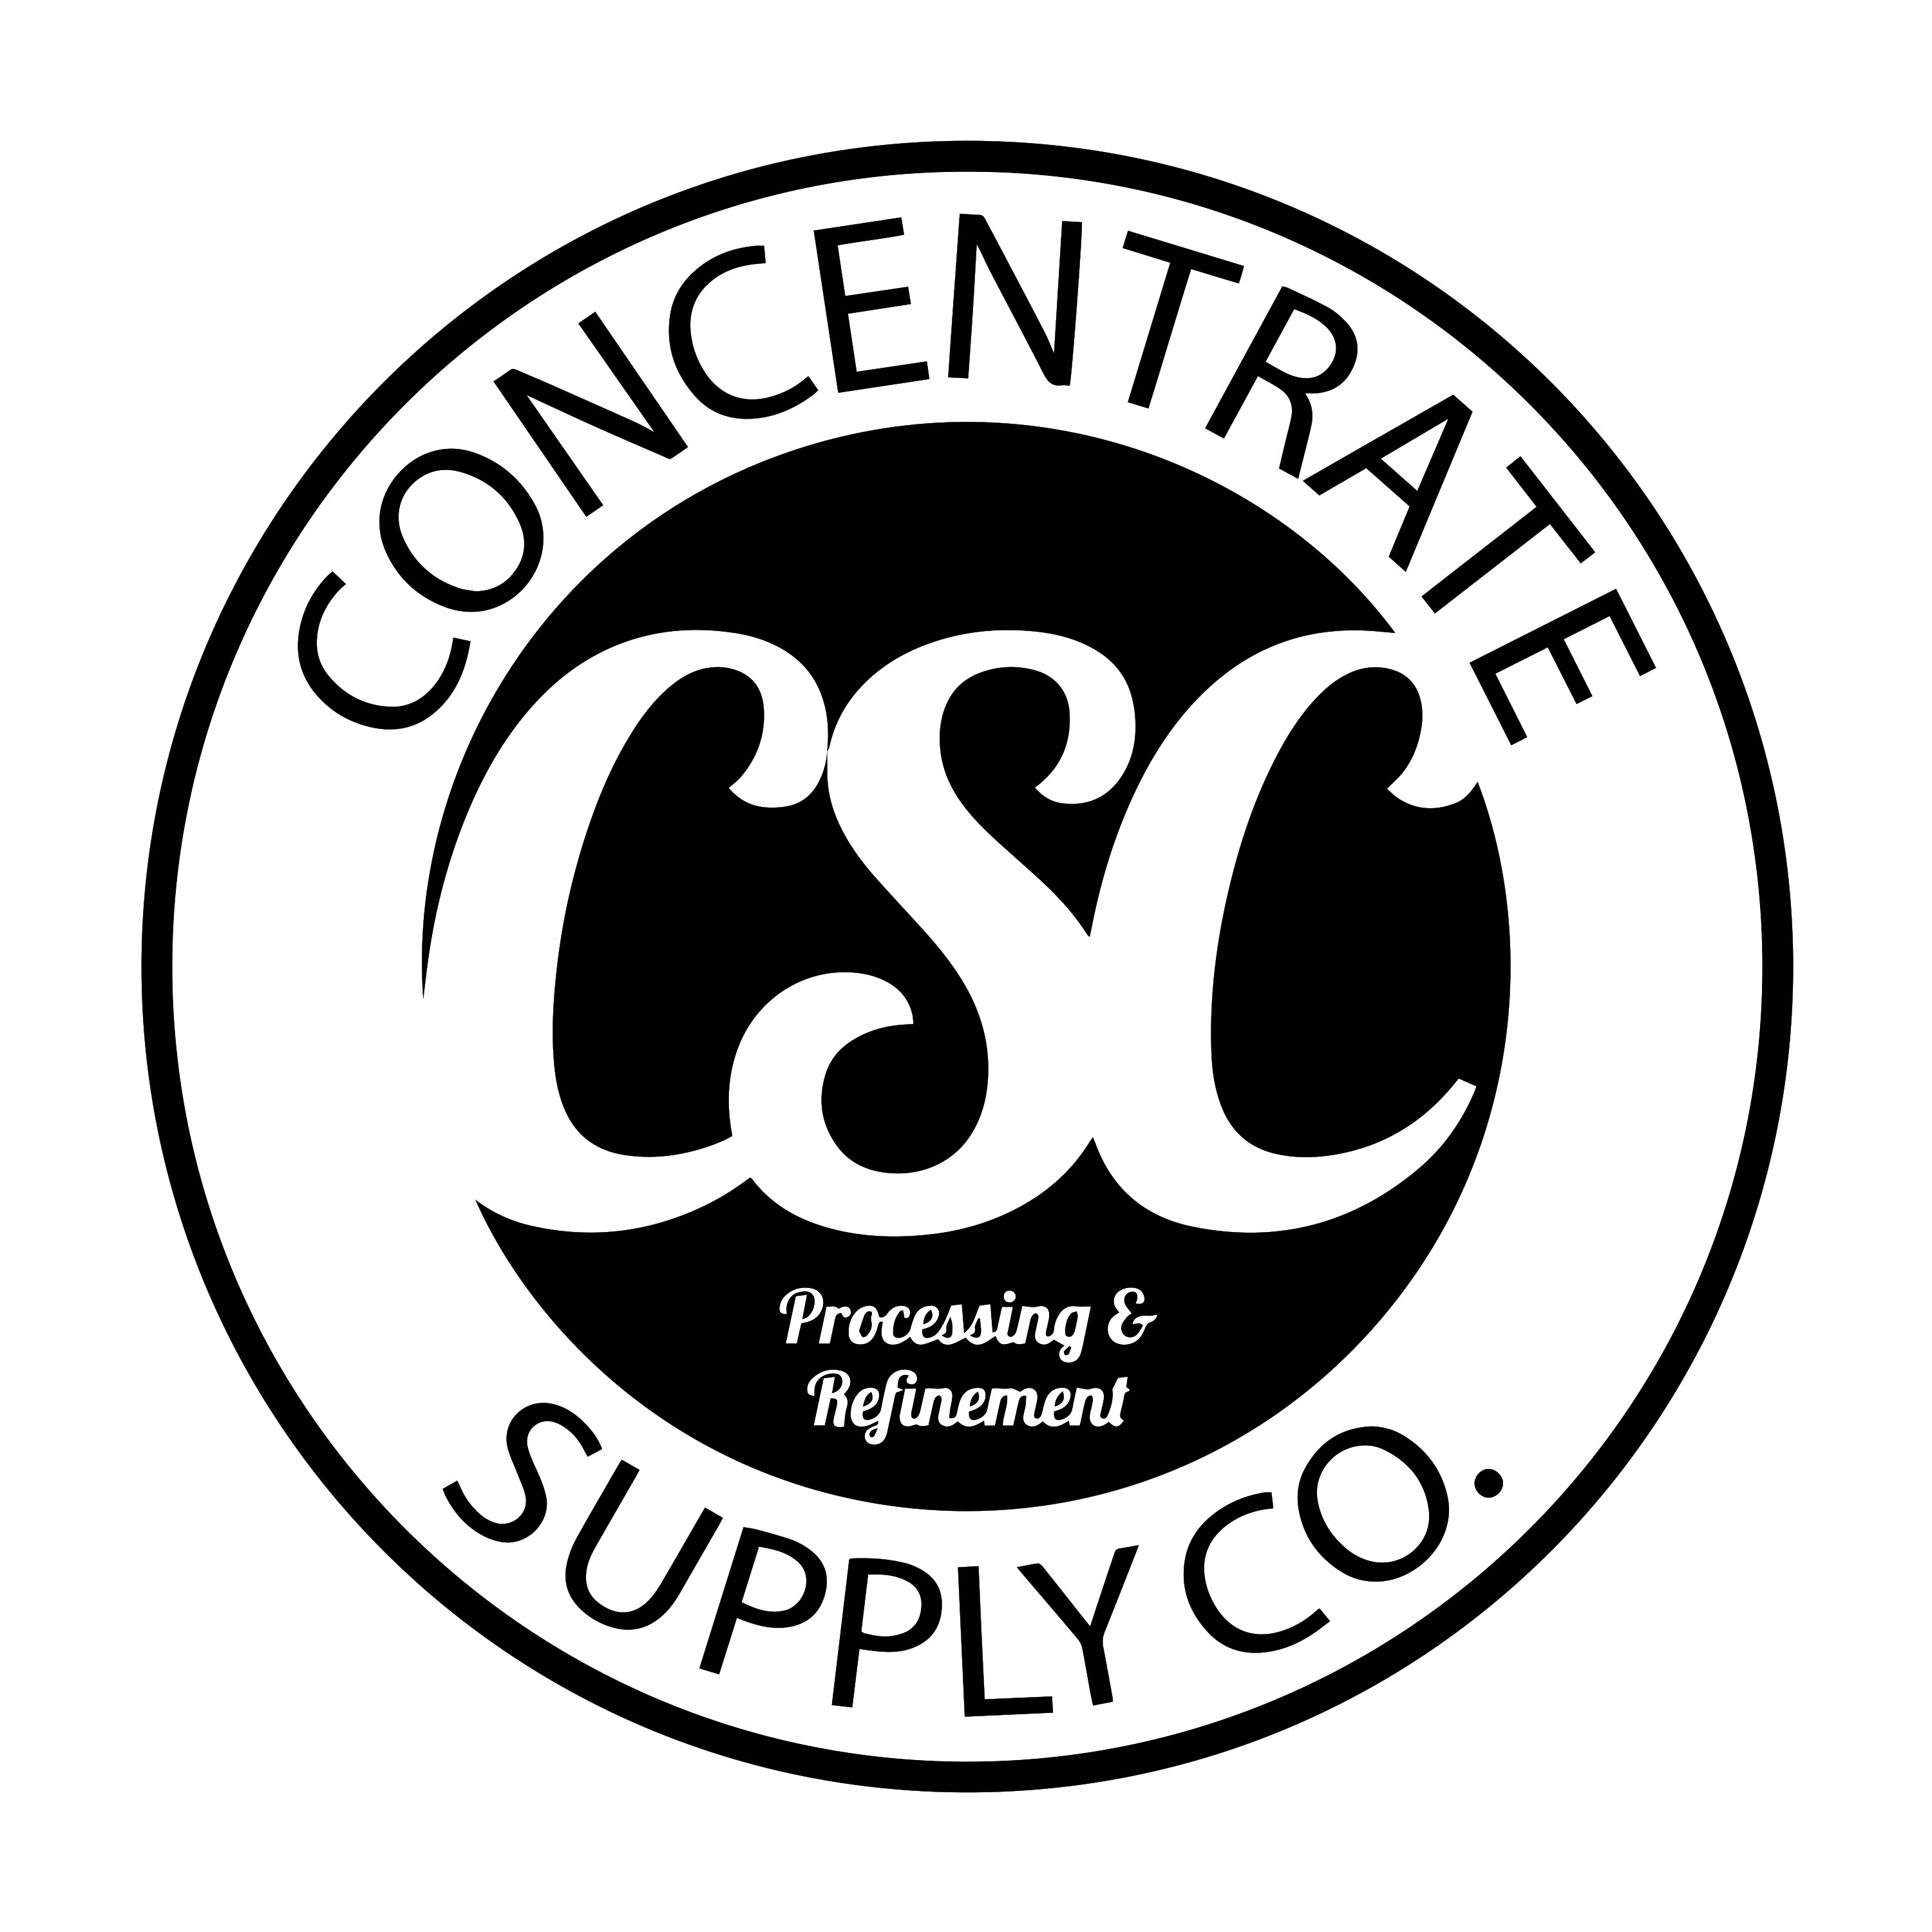 concentrate-500-mg-csc-distillate-cartridge